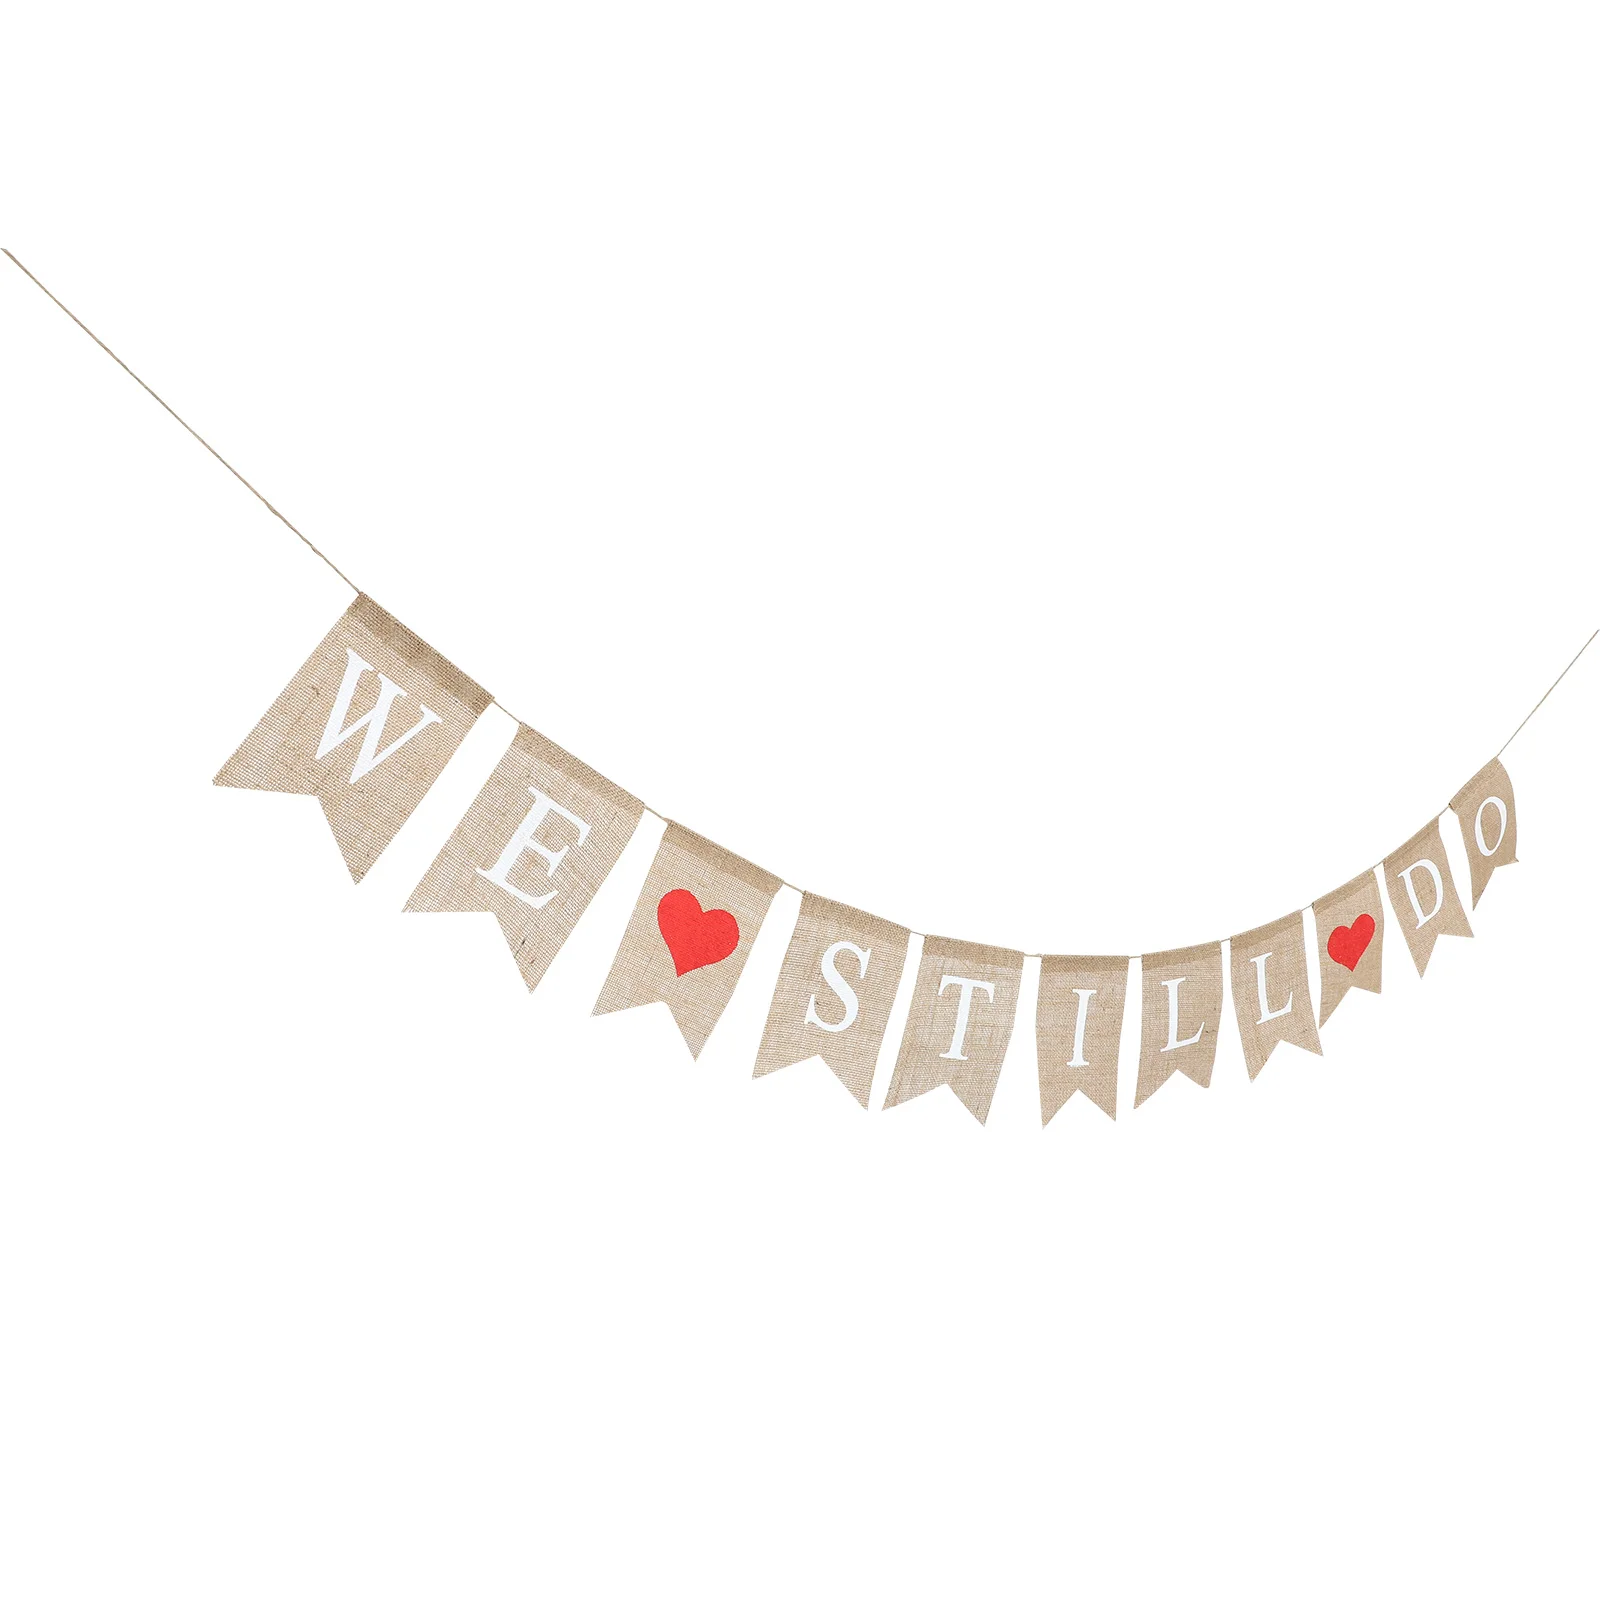 

Wedding Banner Party We Do Hanging Still Garland Swallowtail Decorations Home Bunting Flag Photo Burlap Props Sign Supplies